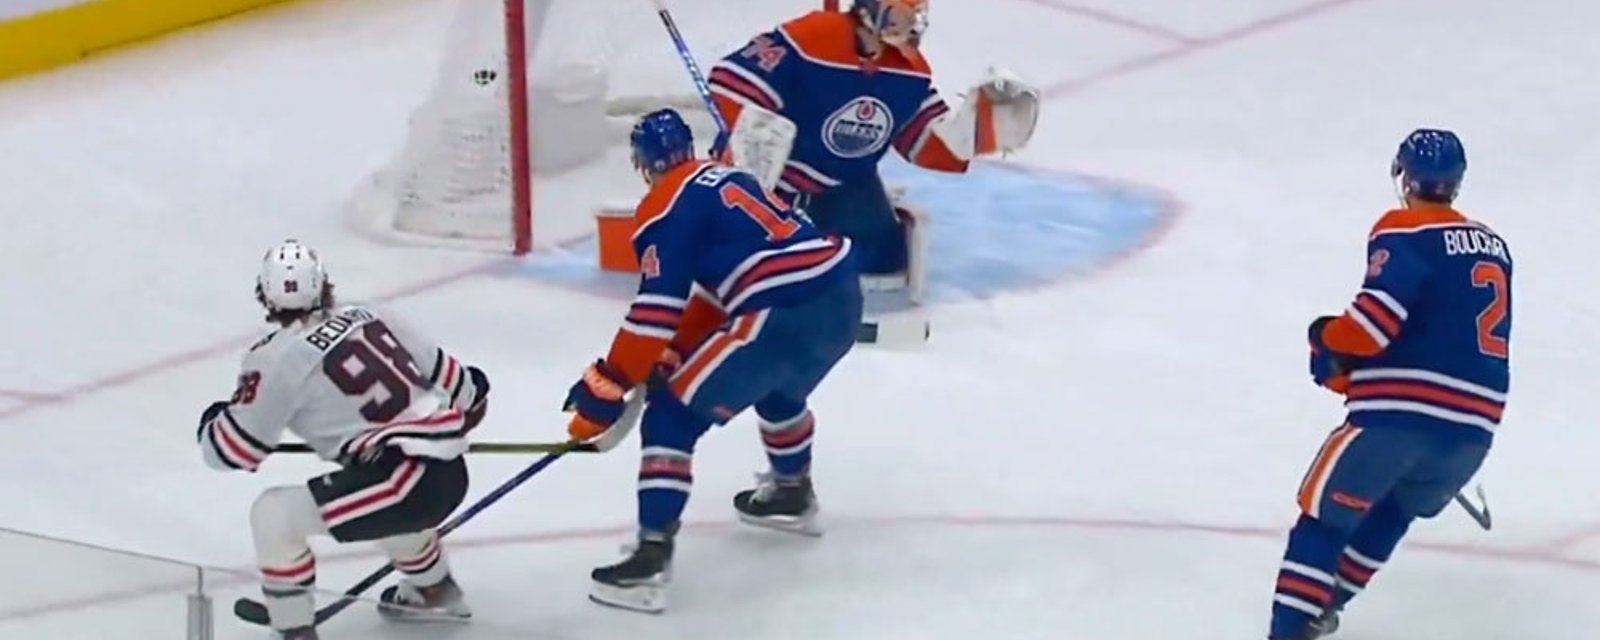 Connor Bedard scores a ridiculous goal in his first game against Connor McDavid